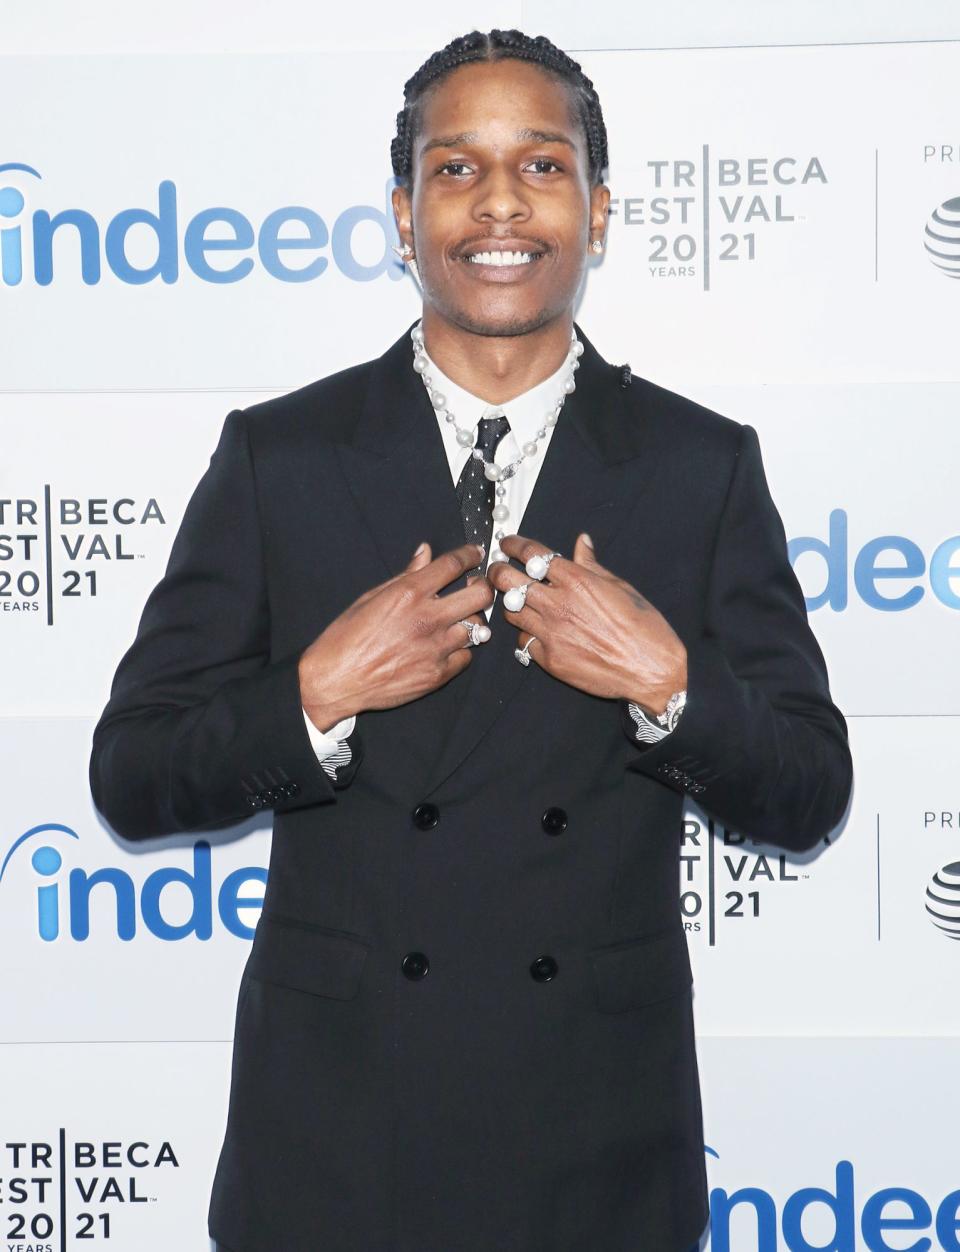 <p>A$AP Rocky looks sharp at the premiere of his documentary, <i>Stockholm Syndrome,</i> at the 2021 Tribeca Film Festival on June 13 in N.Y.C. </p>